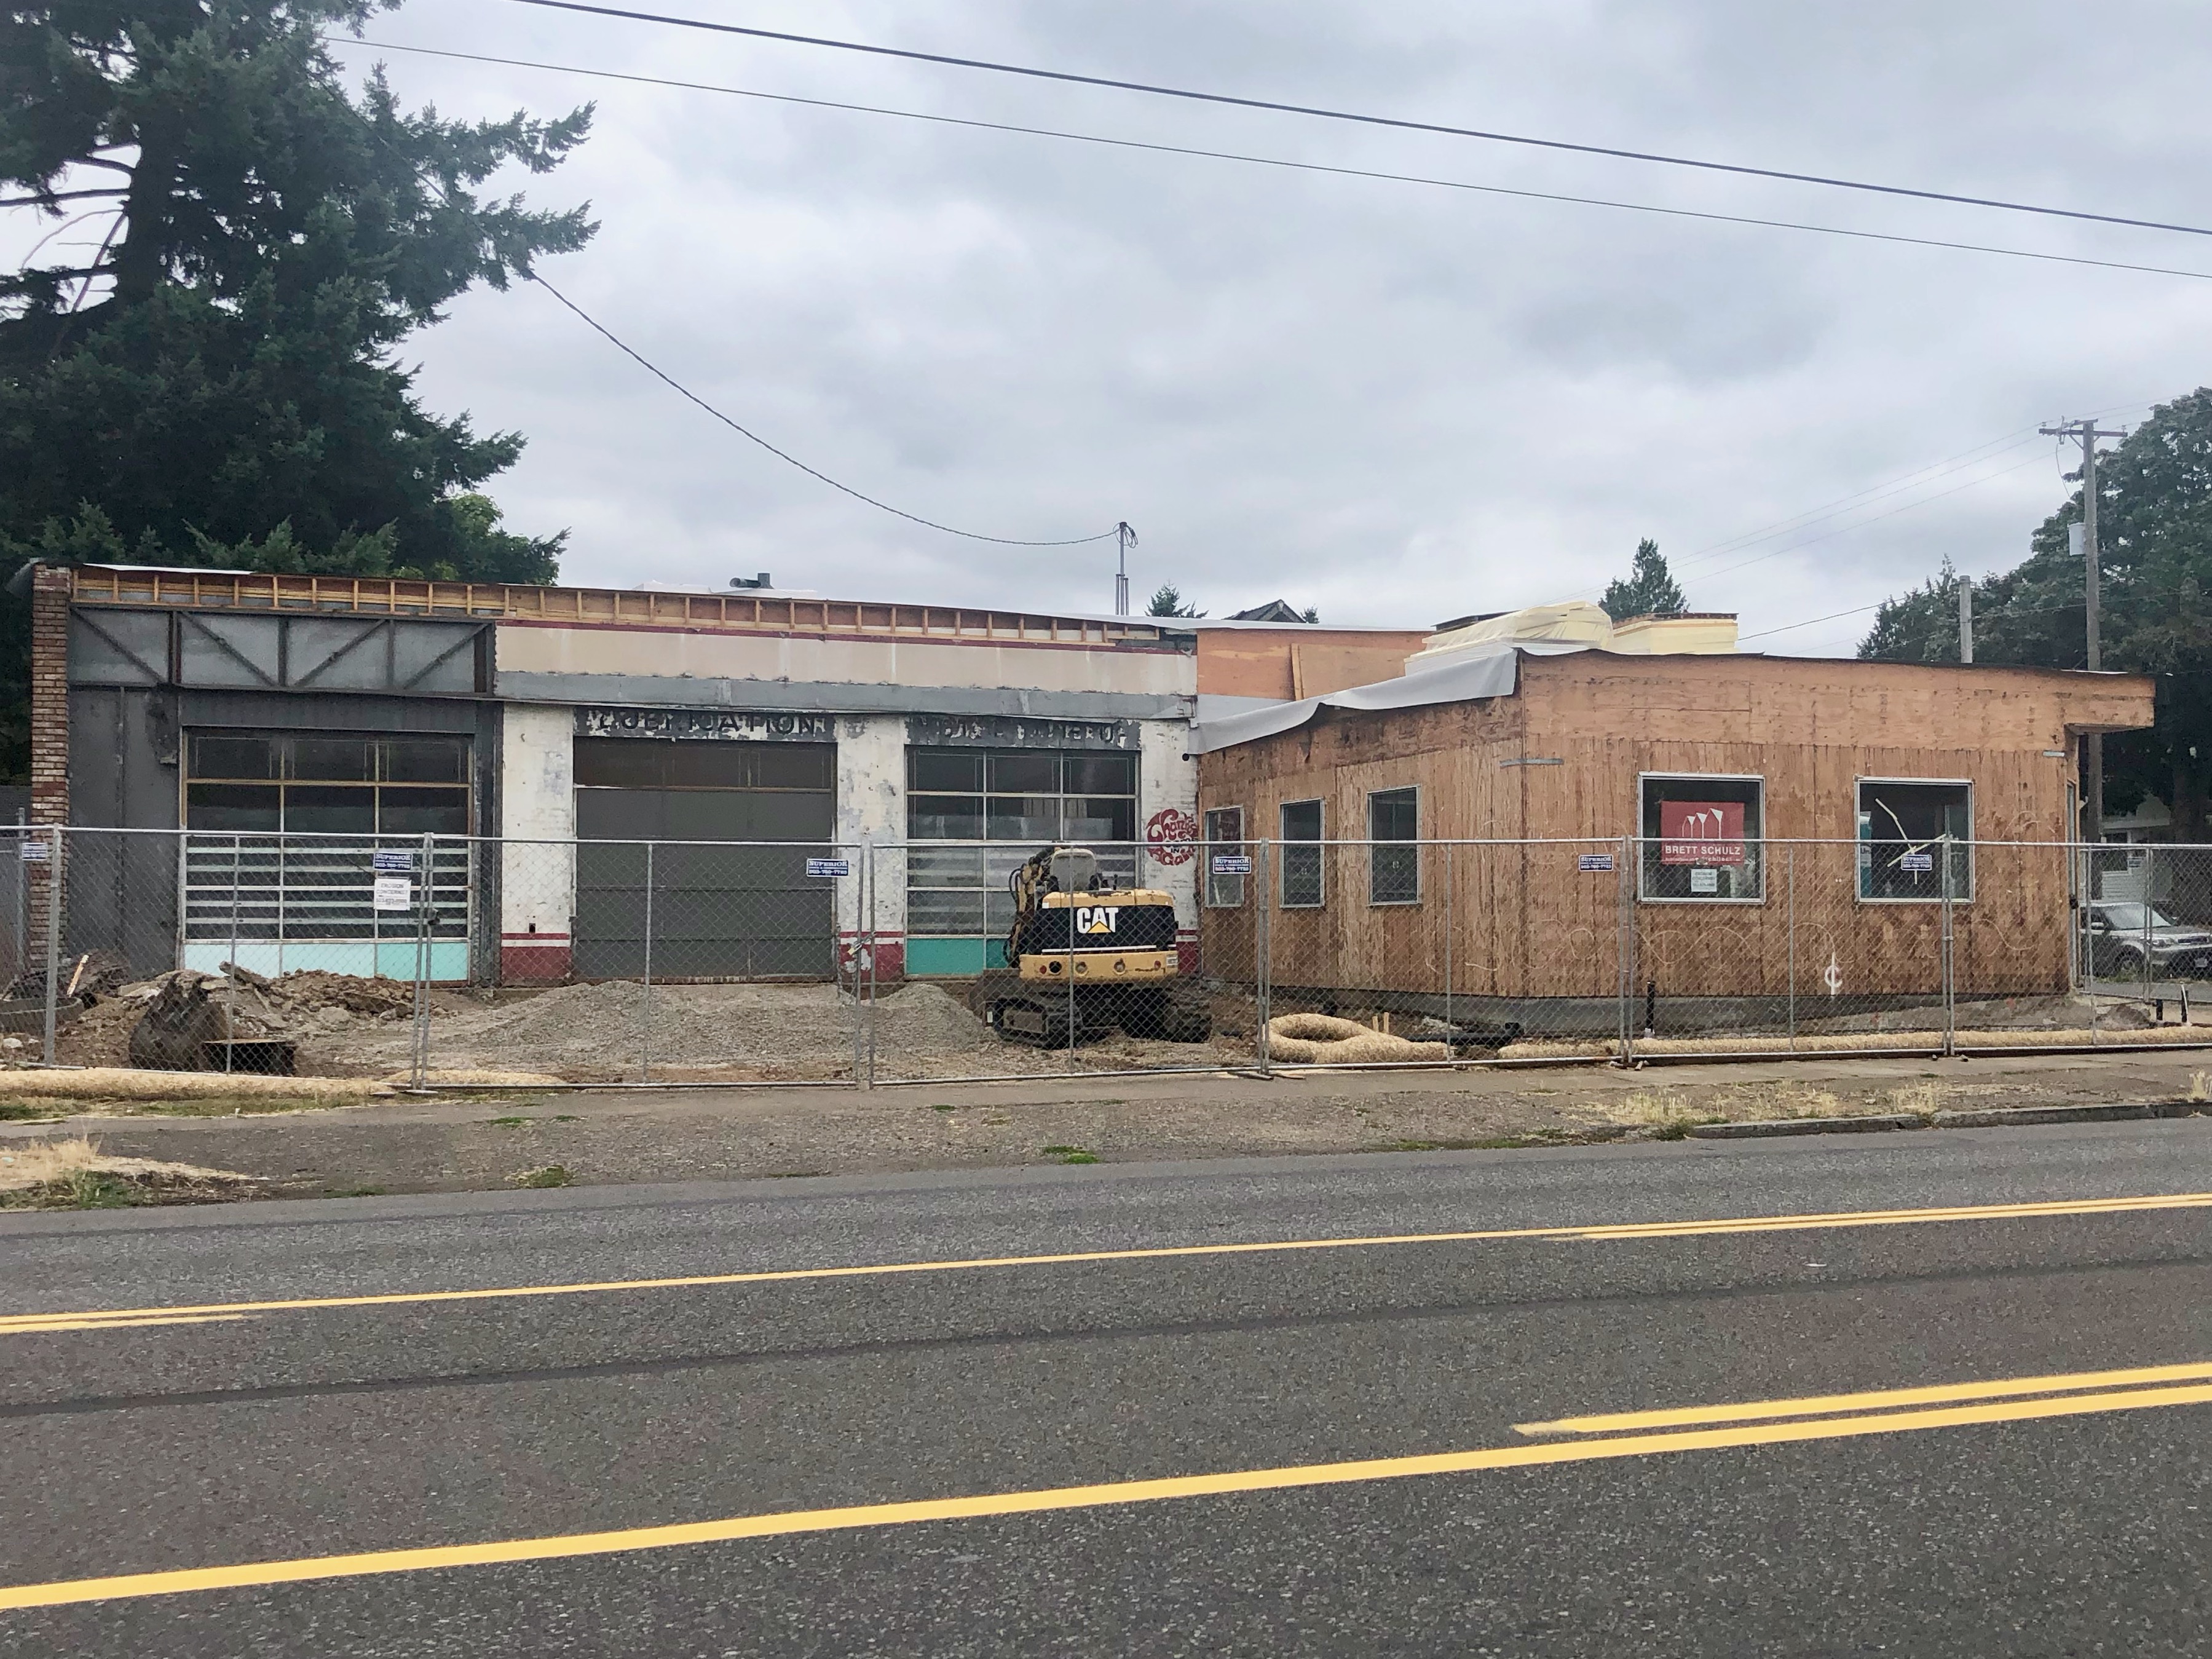 The current streetview of the future home of the Gigantic Brewing Taproom located at 6935 NE Glisan Street in Portland, Oregon.